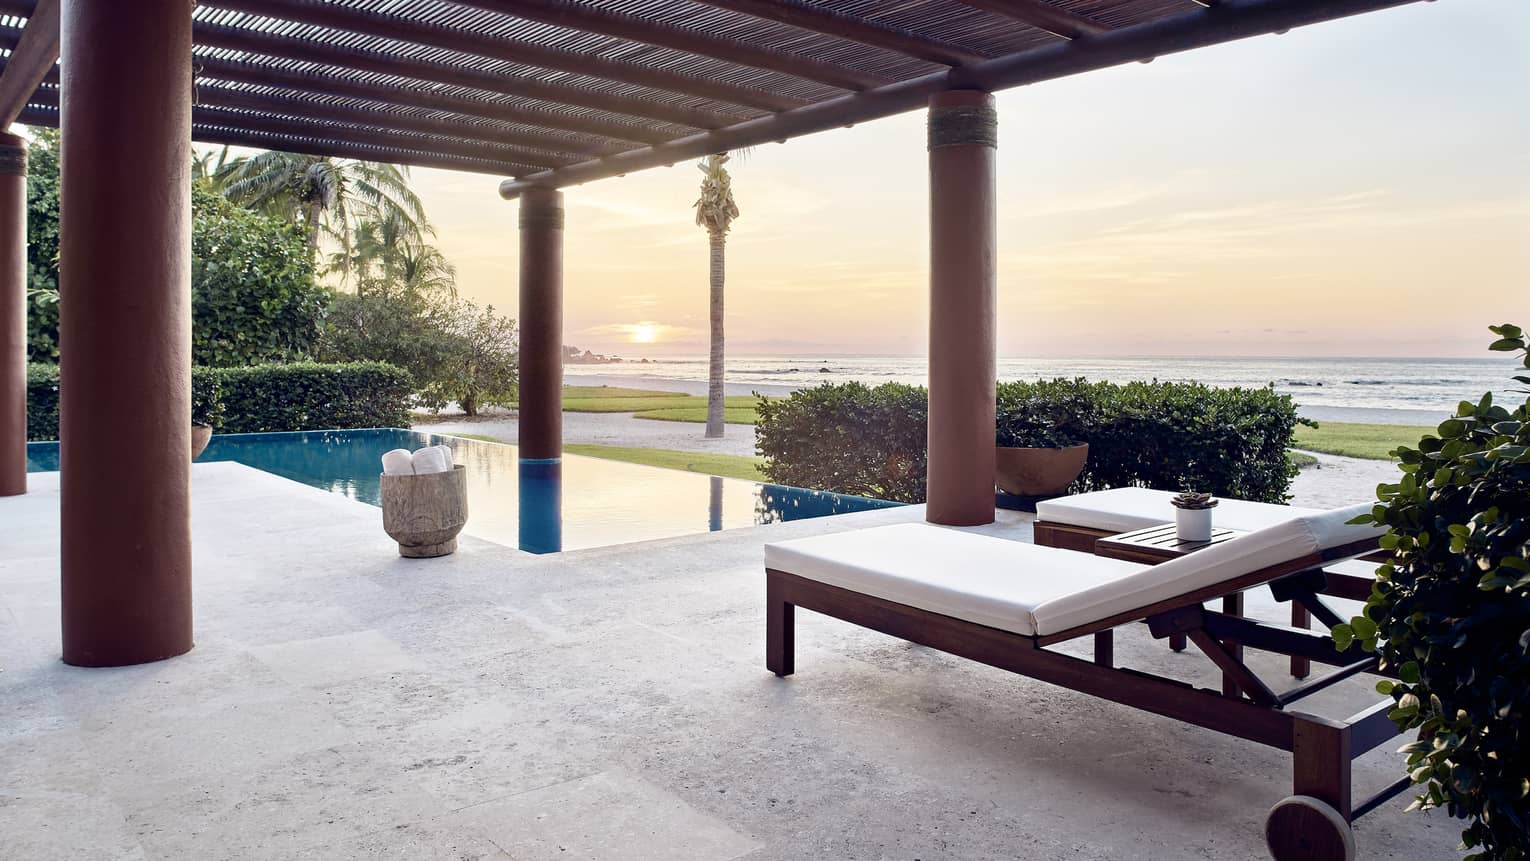 Outdoor terrace with lounge chairs, private pool, sun setting over the sea